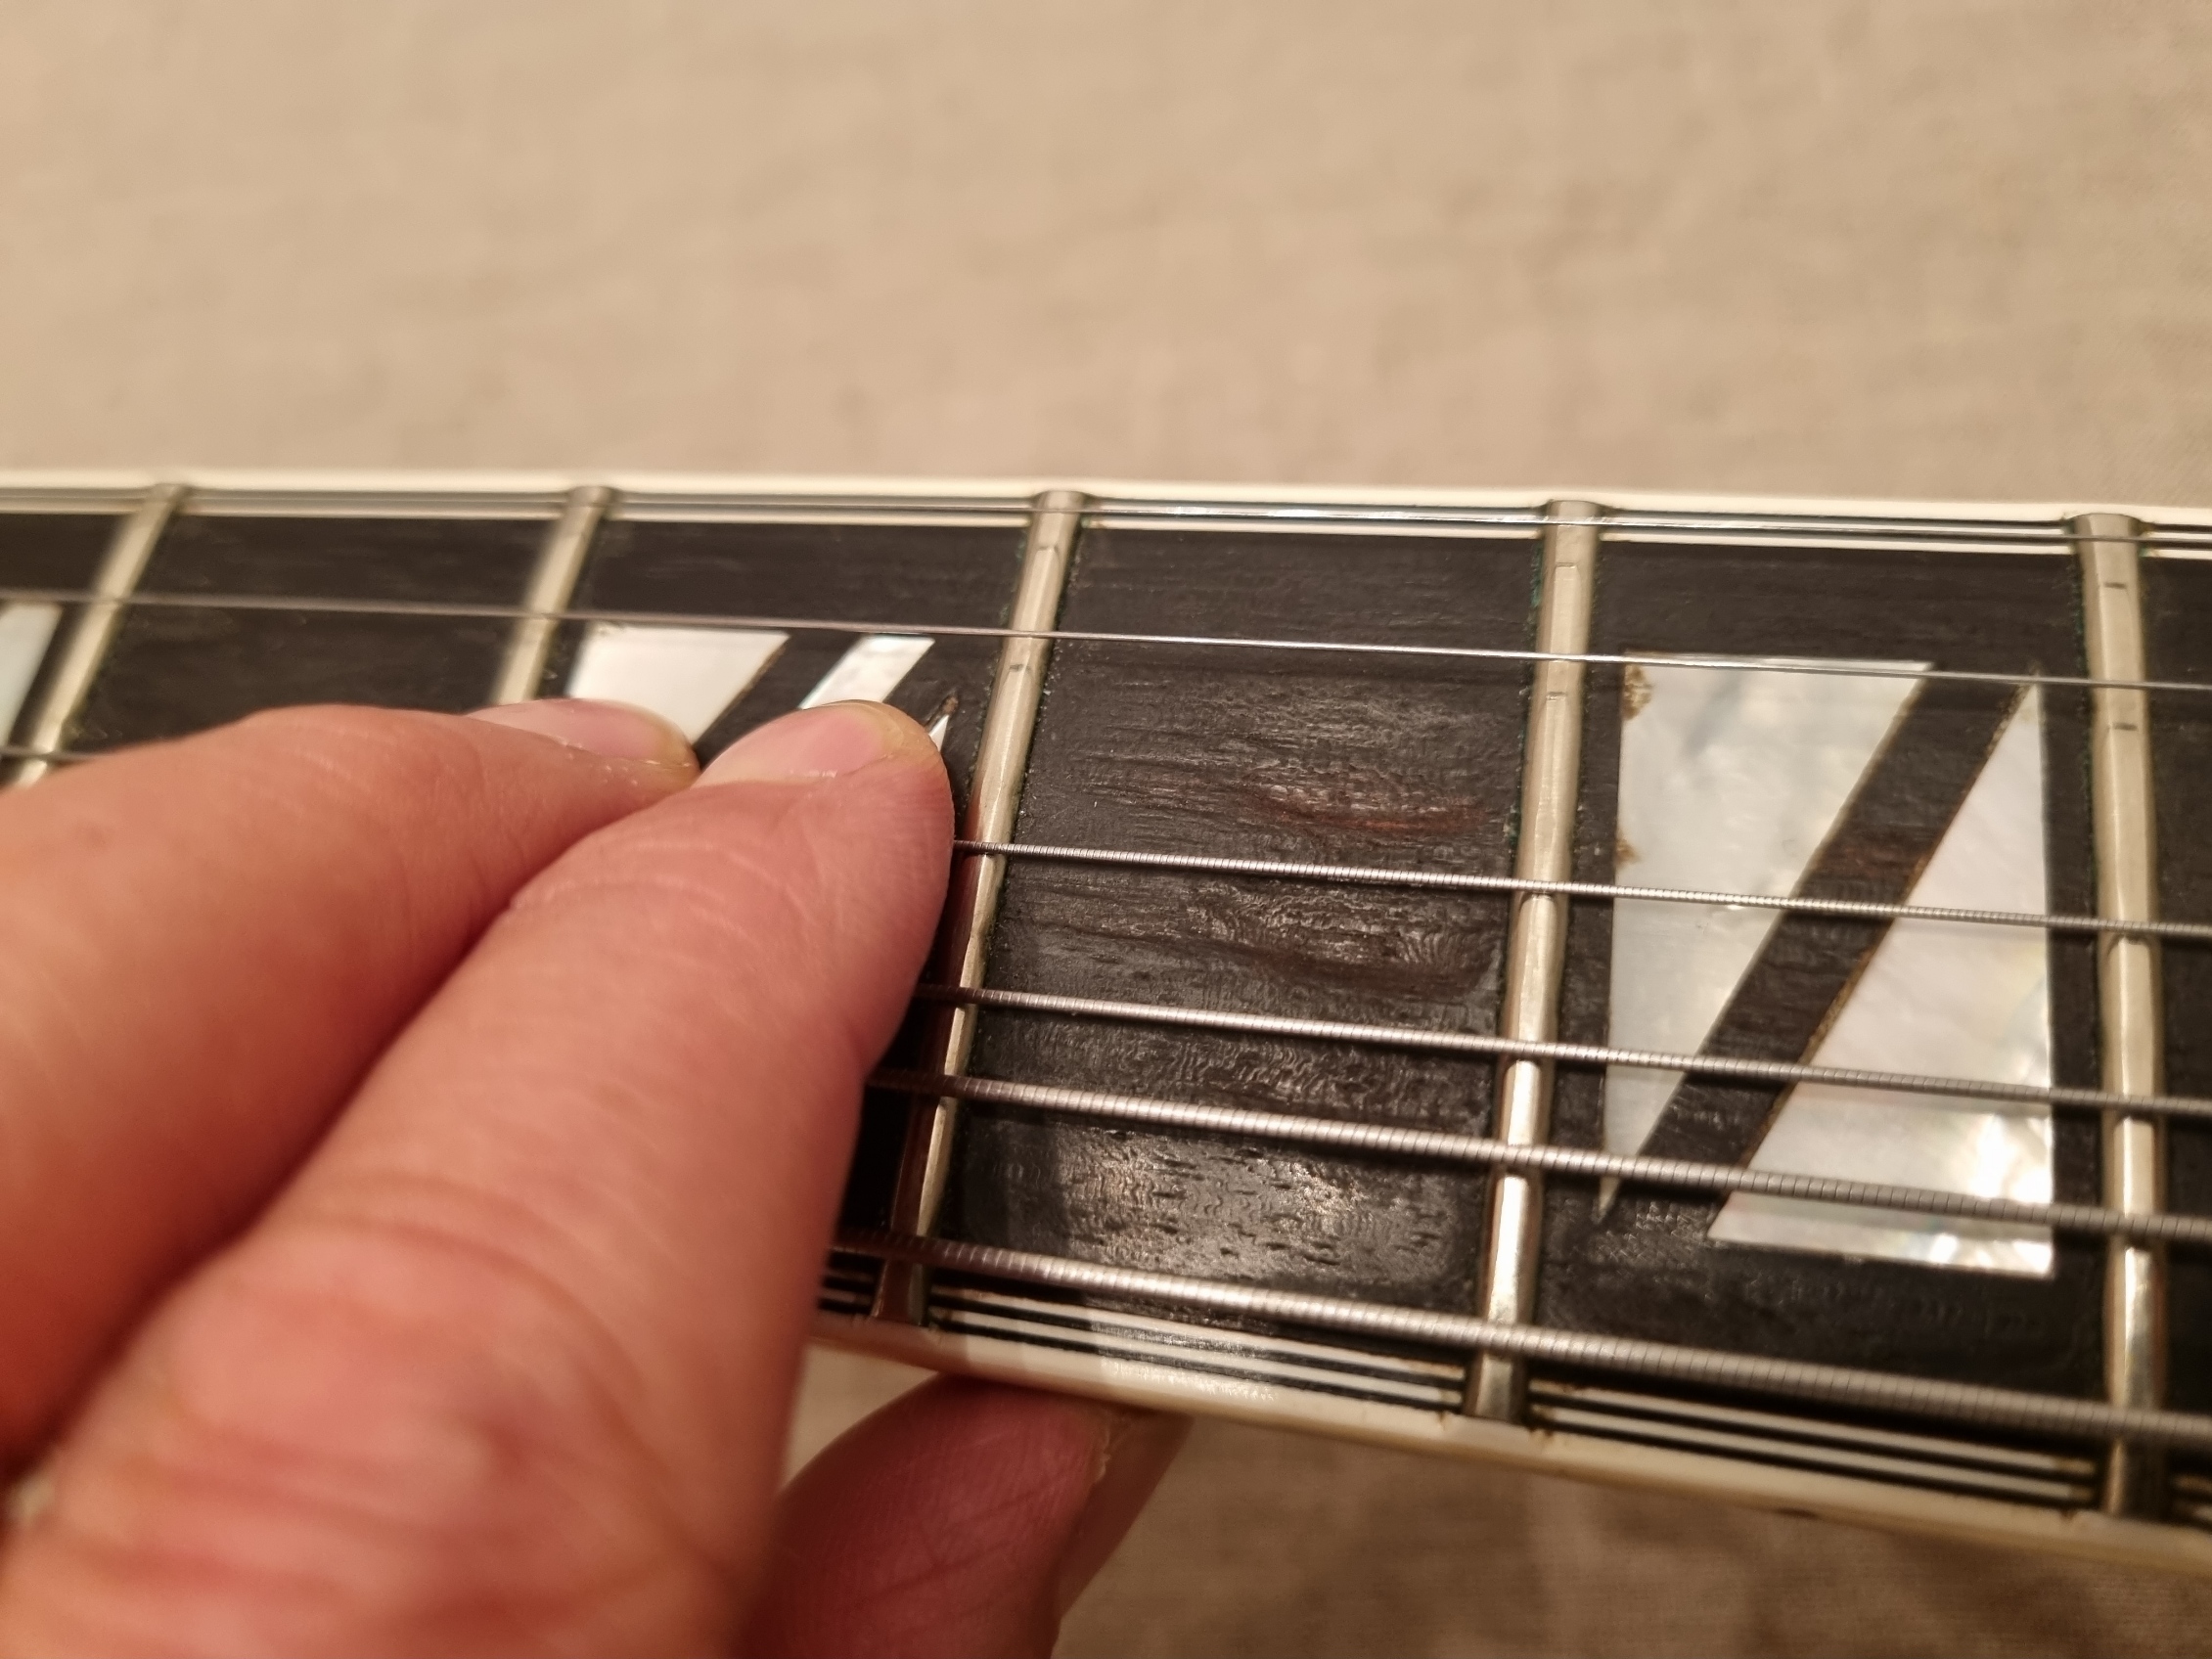 Fretboard pitting - What's the deal?-20210913_201428-jpg